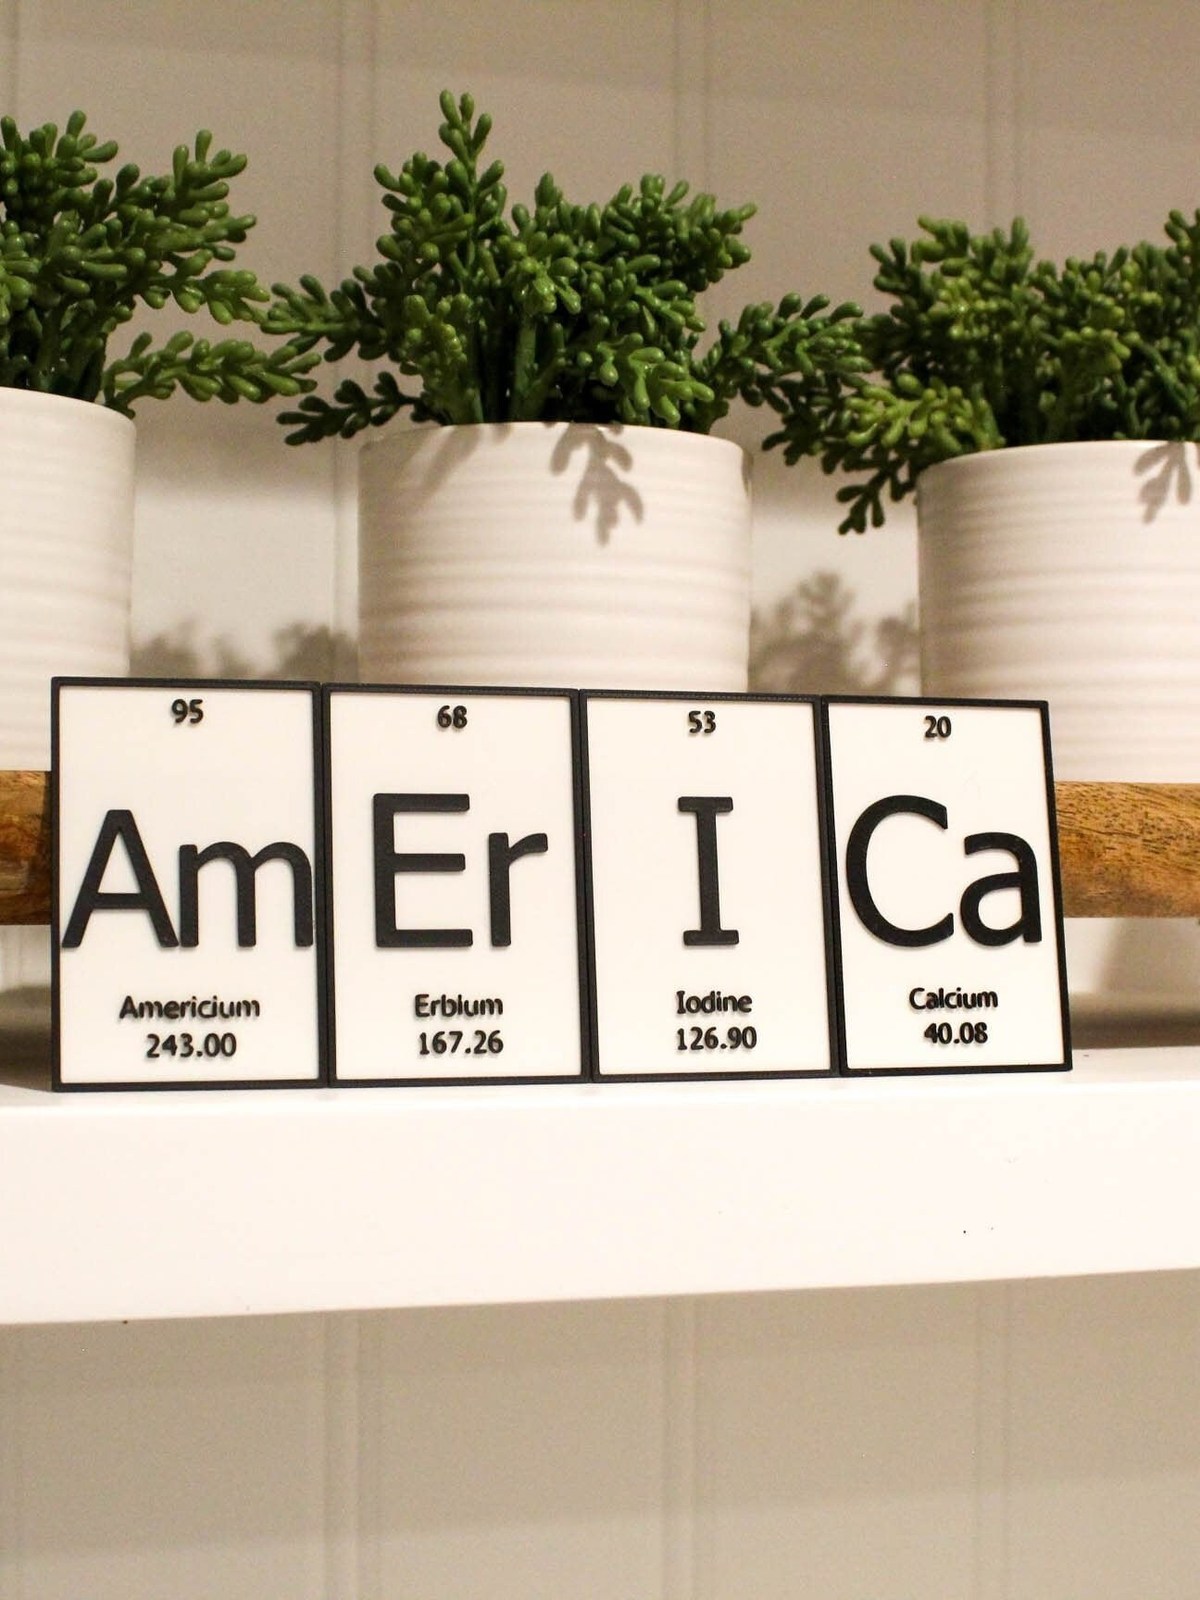 Primary image for AmErIcaN | Periodic Table of Elements Wall, Desk or Shelf Sign